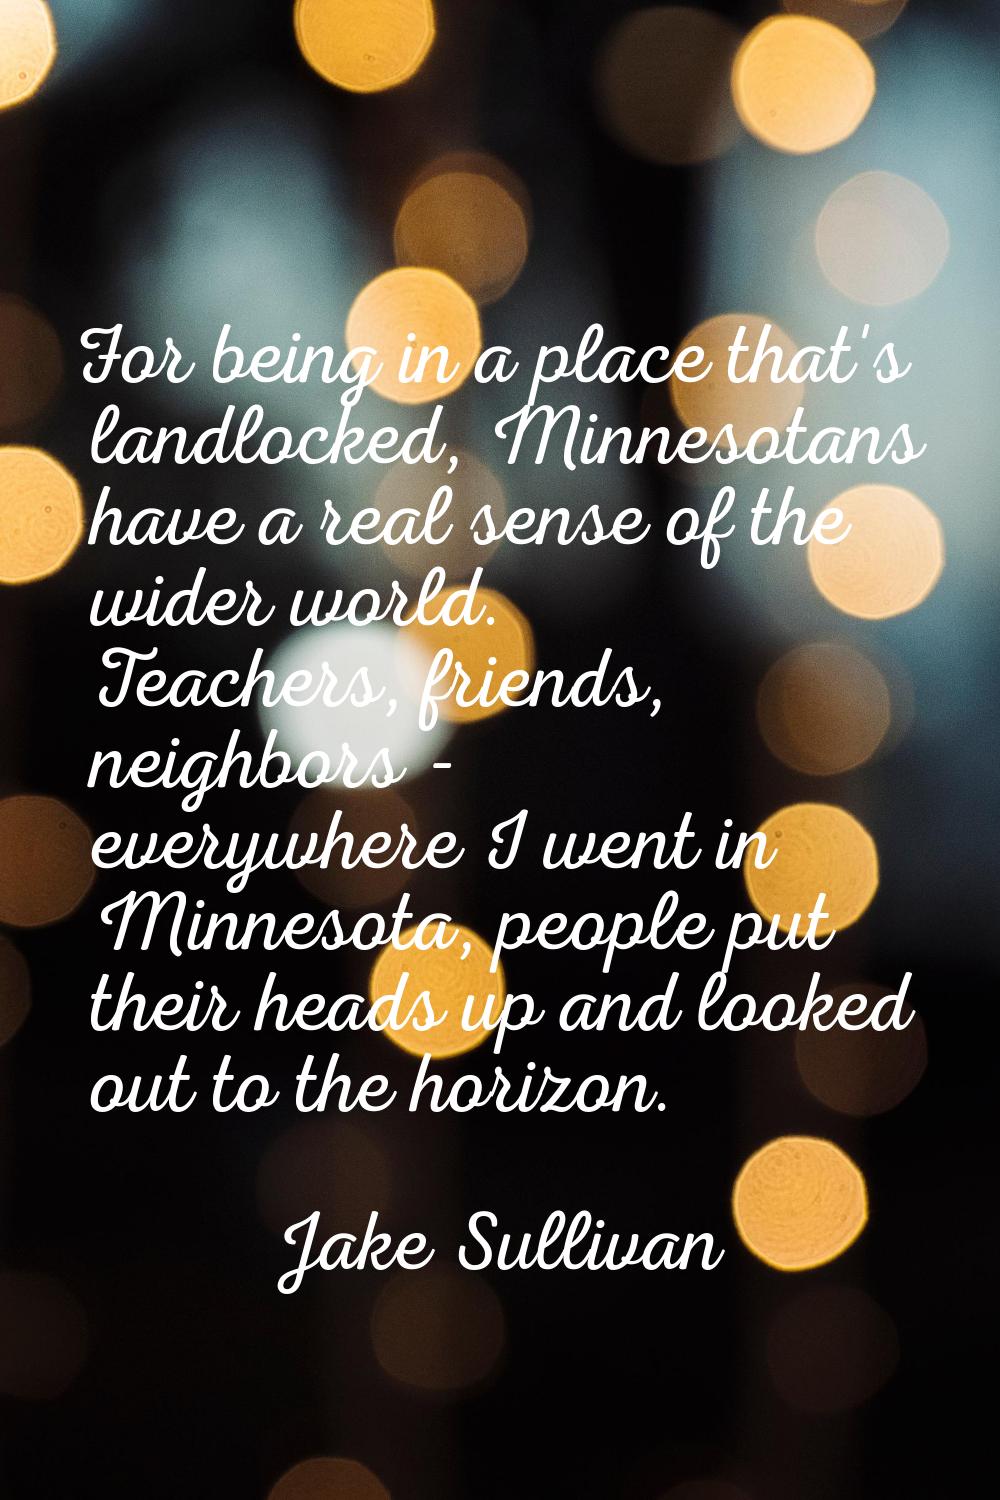 For being in a place that's landlocked, Minnesotans have a real sense of the wider world. Teachers,